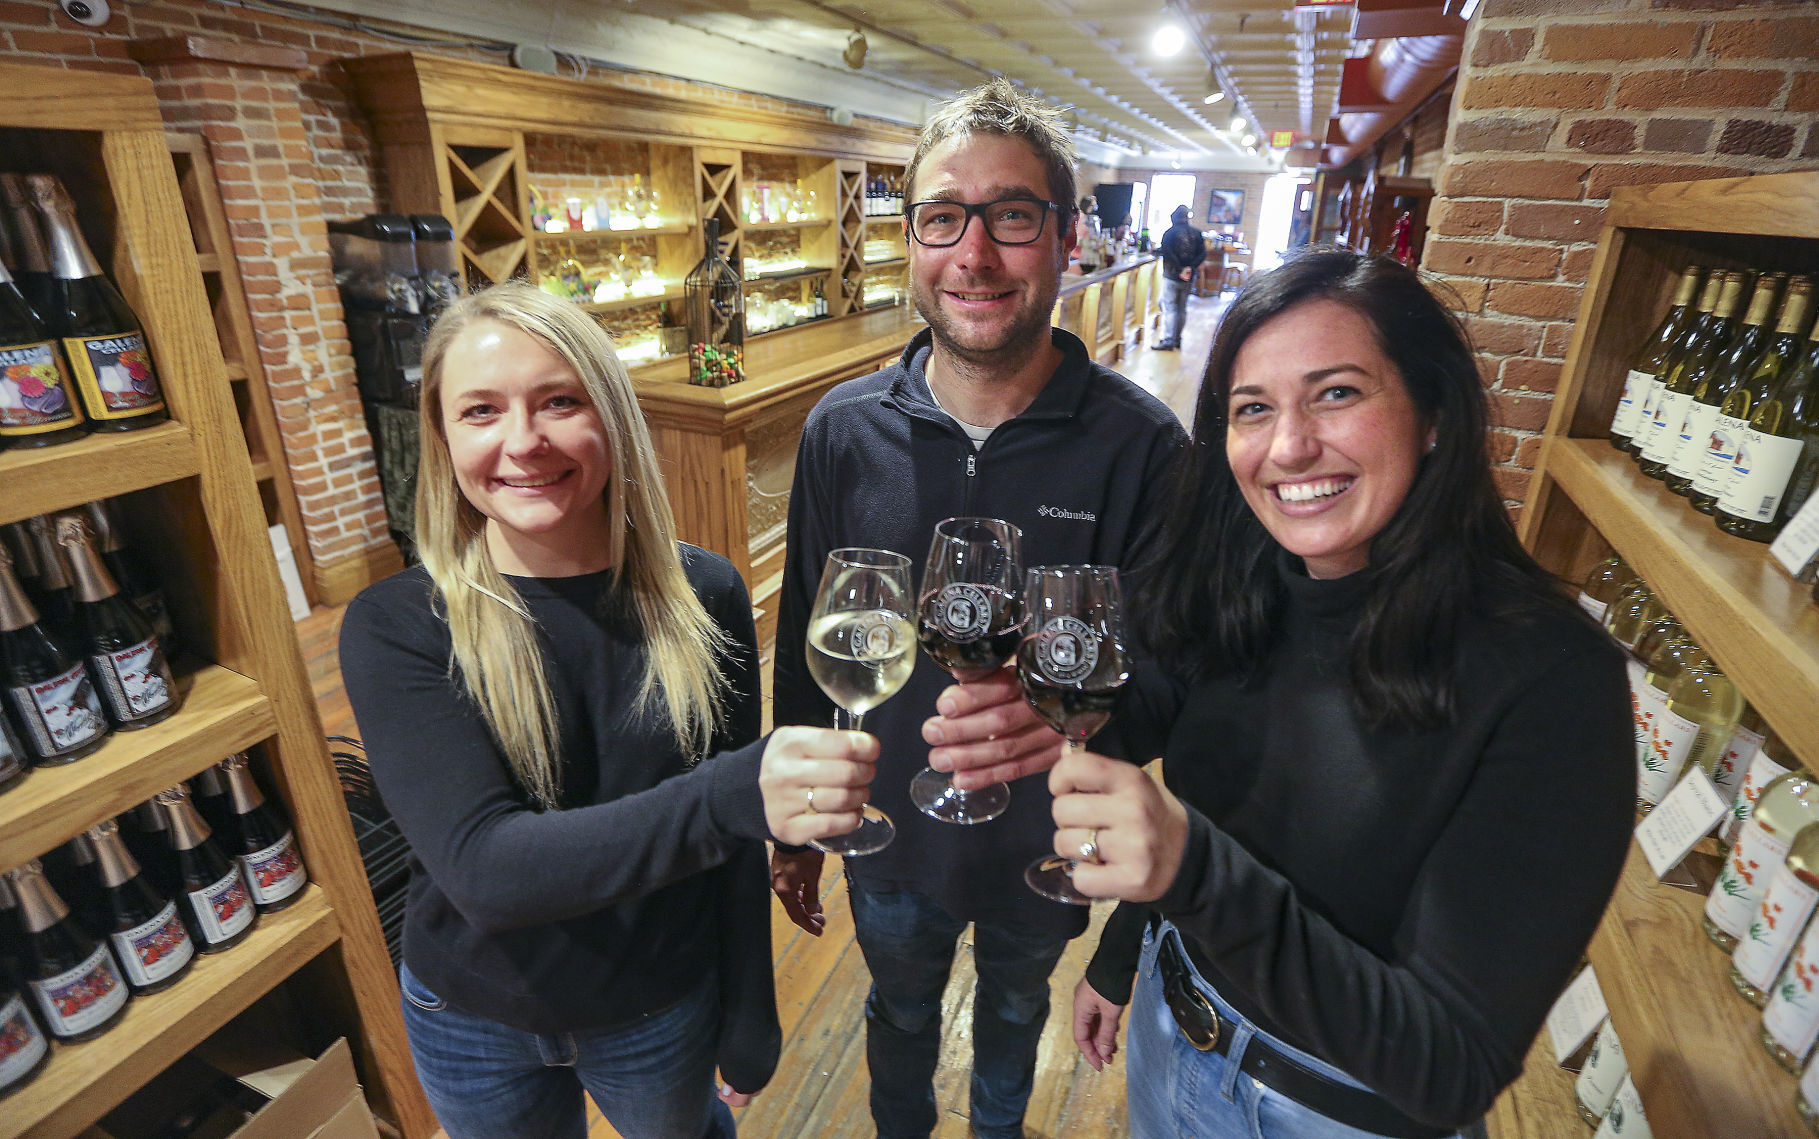 Galena Cellars Winery and Vineyard recently relocated to 111 N. Main St. in Galena, Ill. Pictured are members of the ownership family, Britt White (left) along with her brother, Eric White, and his wife, Oniqueh Giles-White.    PHOTO CREDIT: Dave Kettering